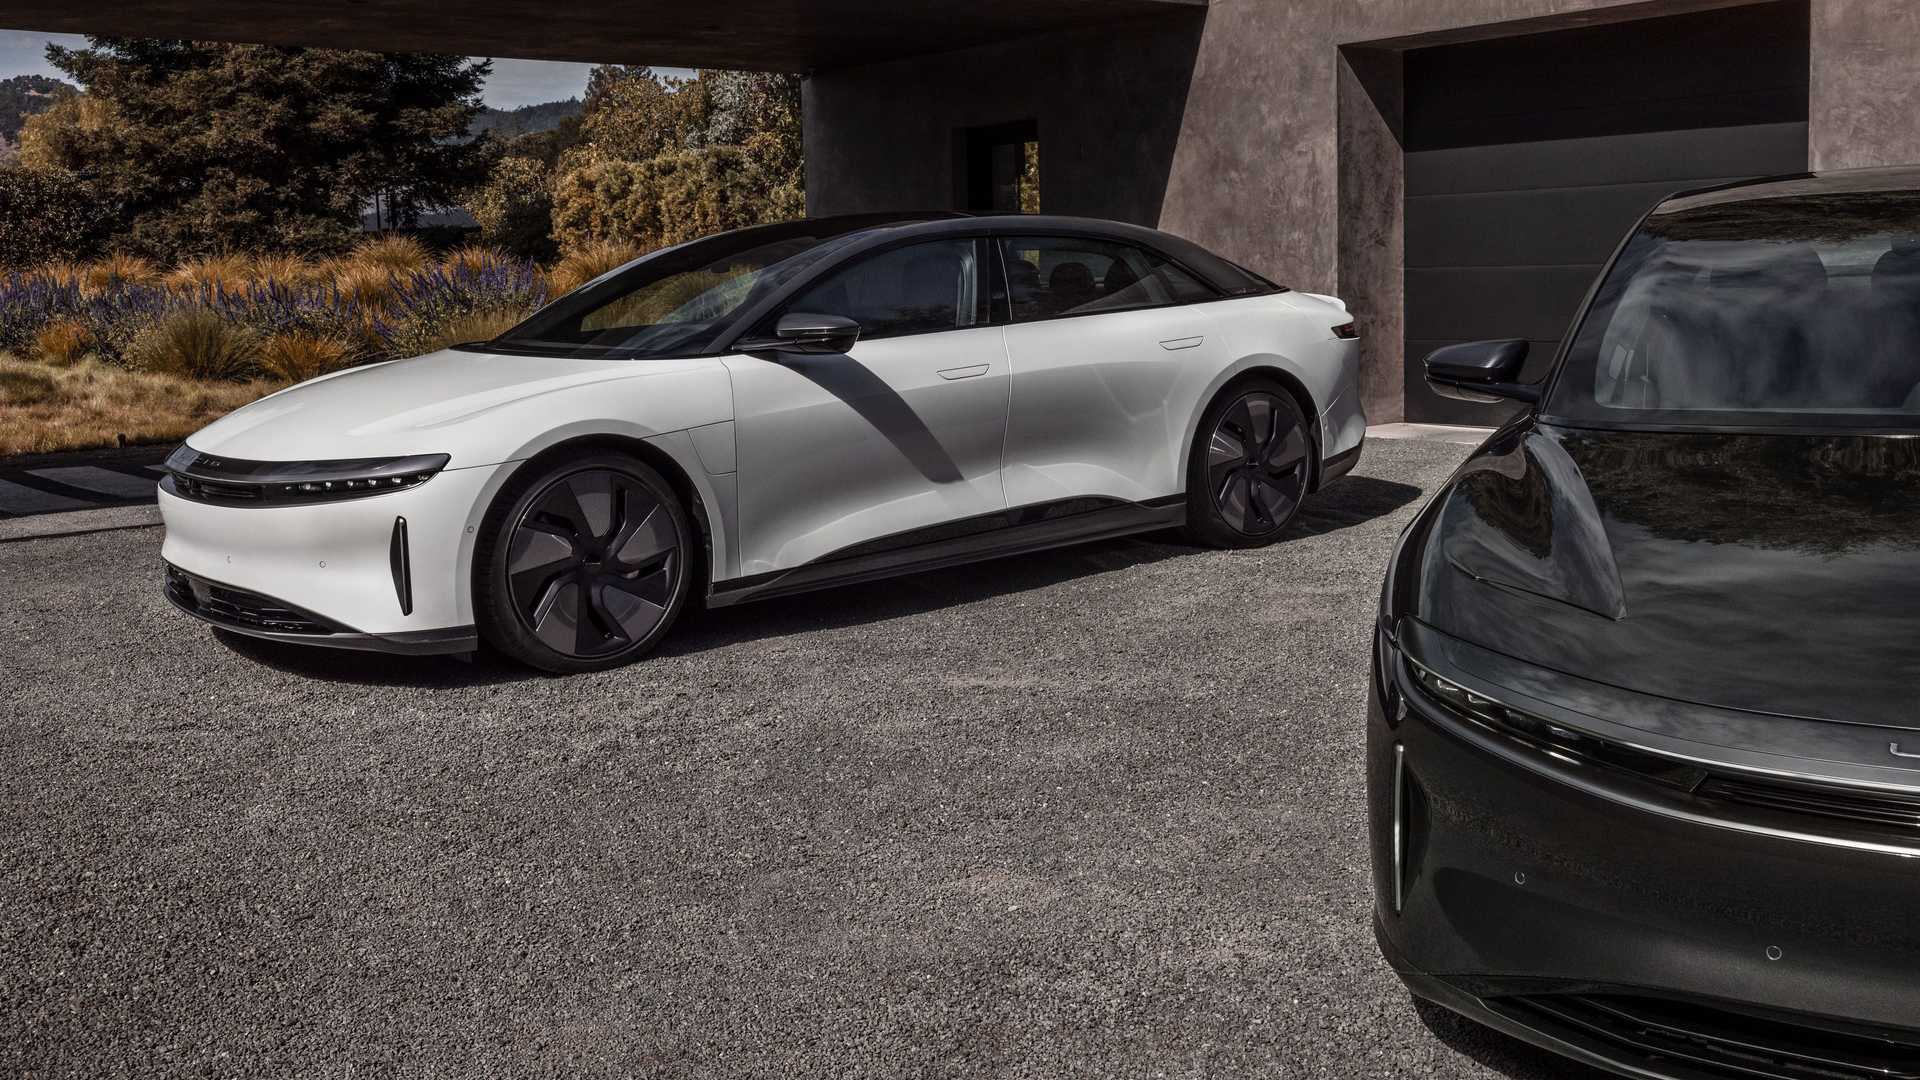 lucid air price cuts are working, sales on the rise, ceo says